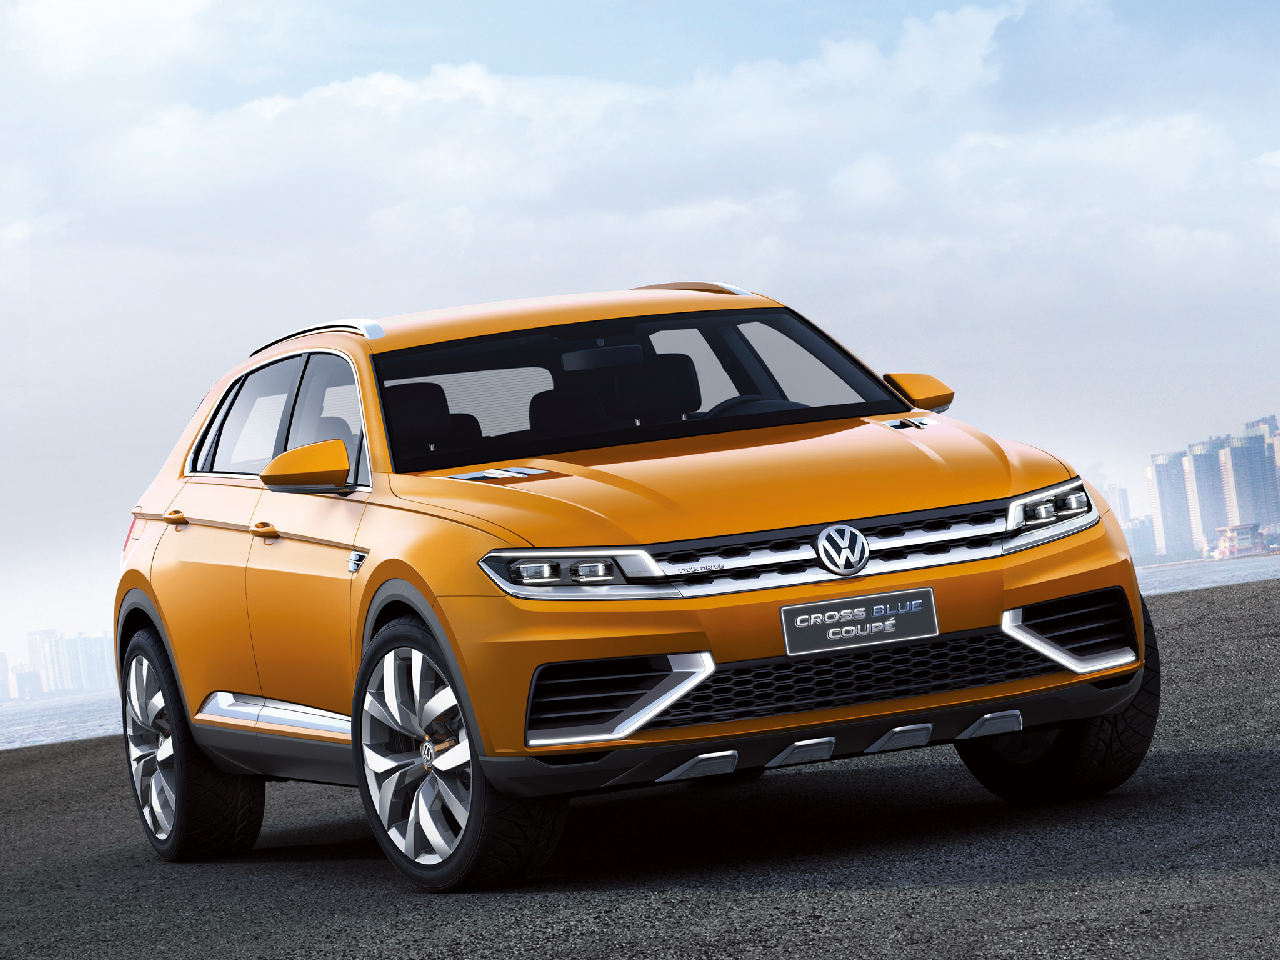 Volkswagen Crossblue Coupe Concept 5